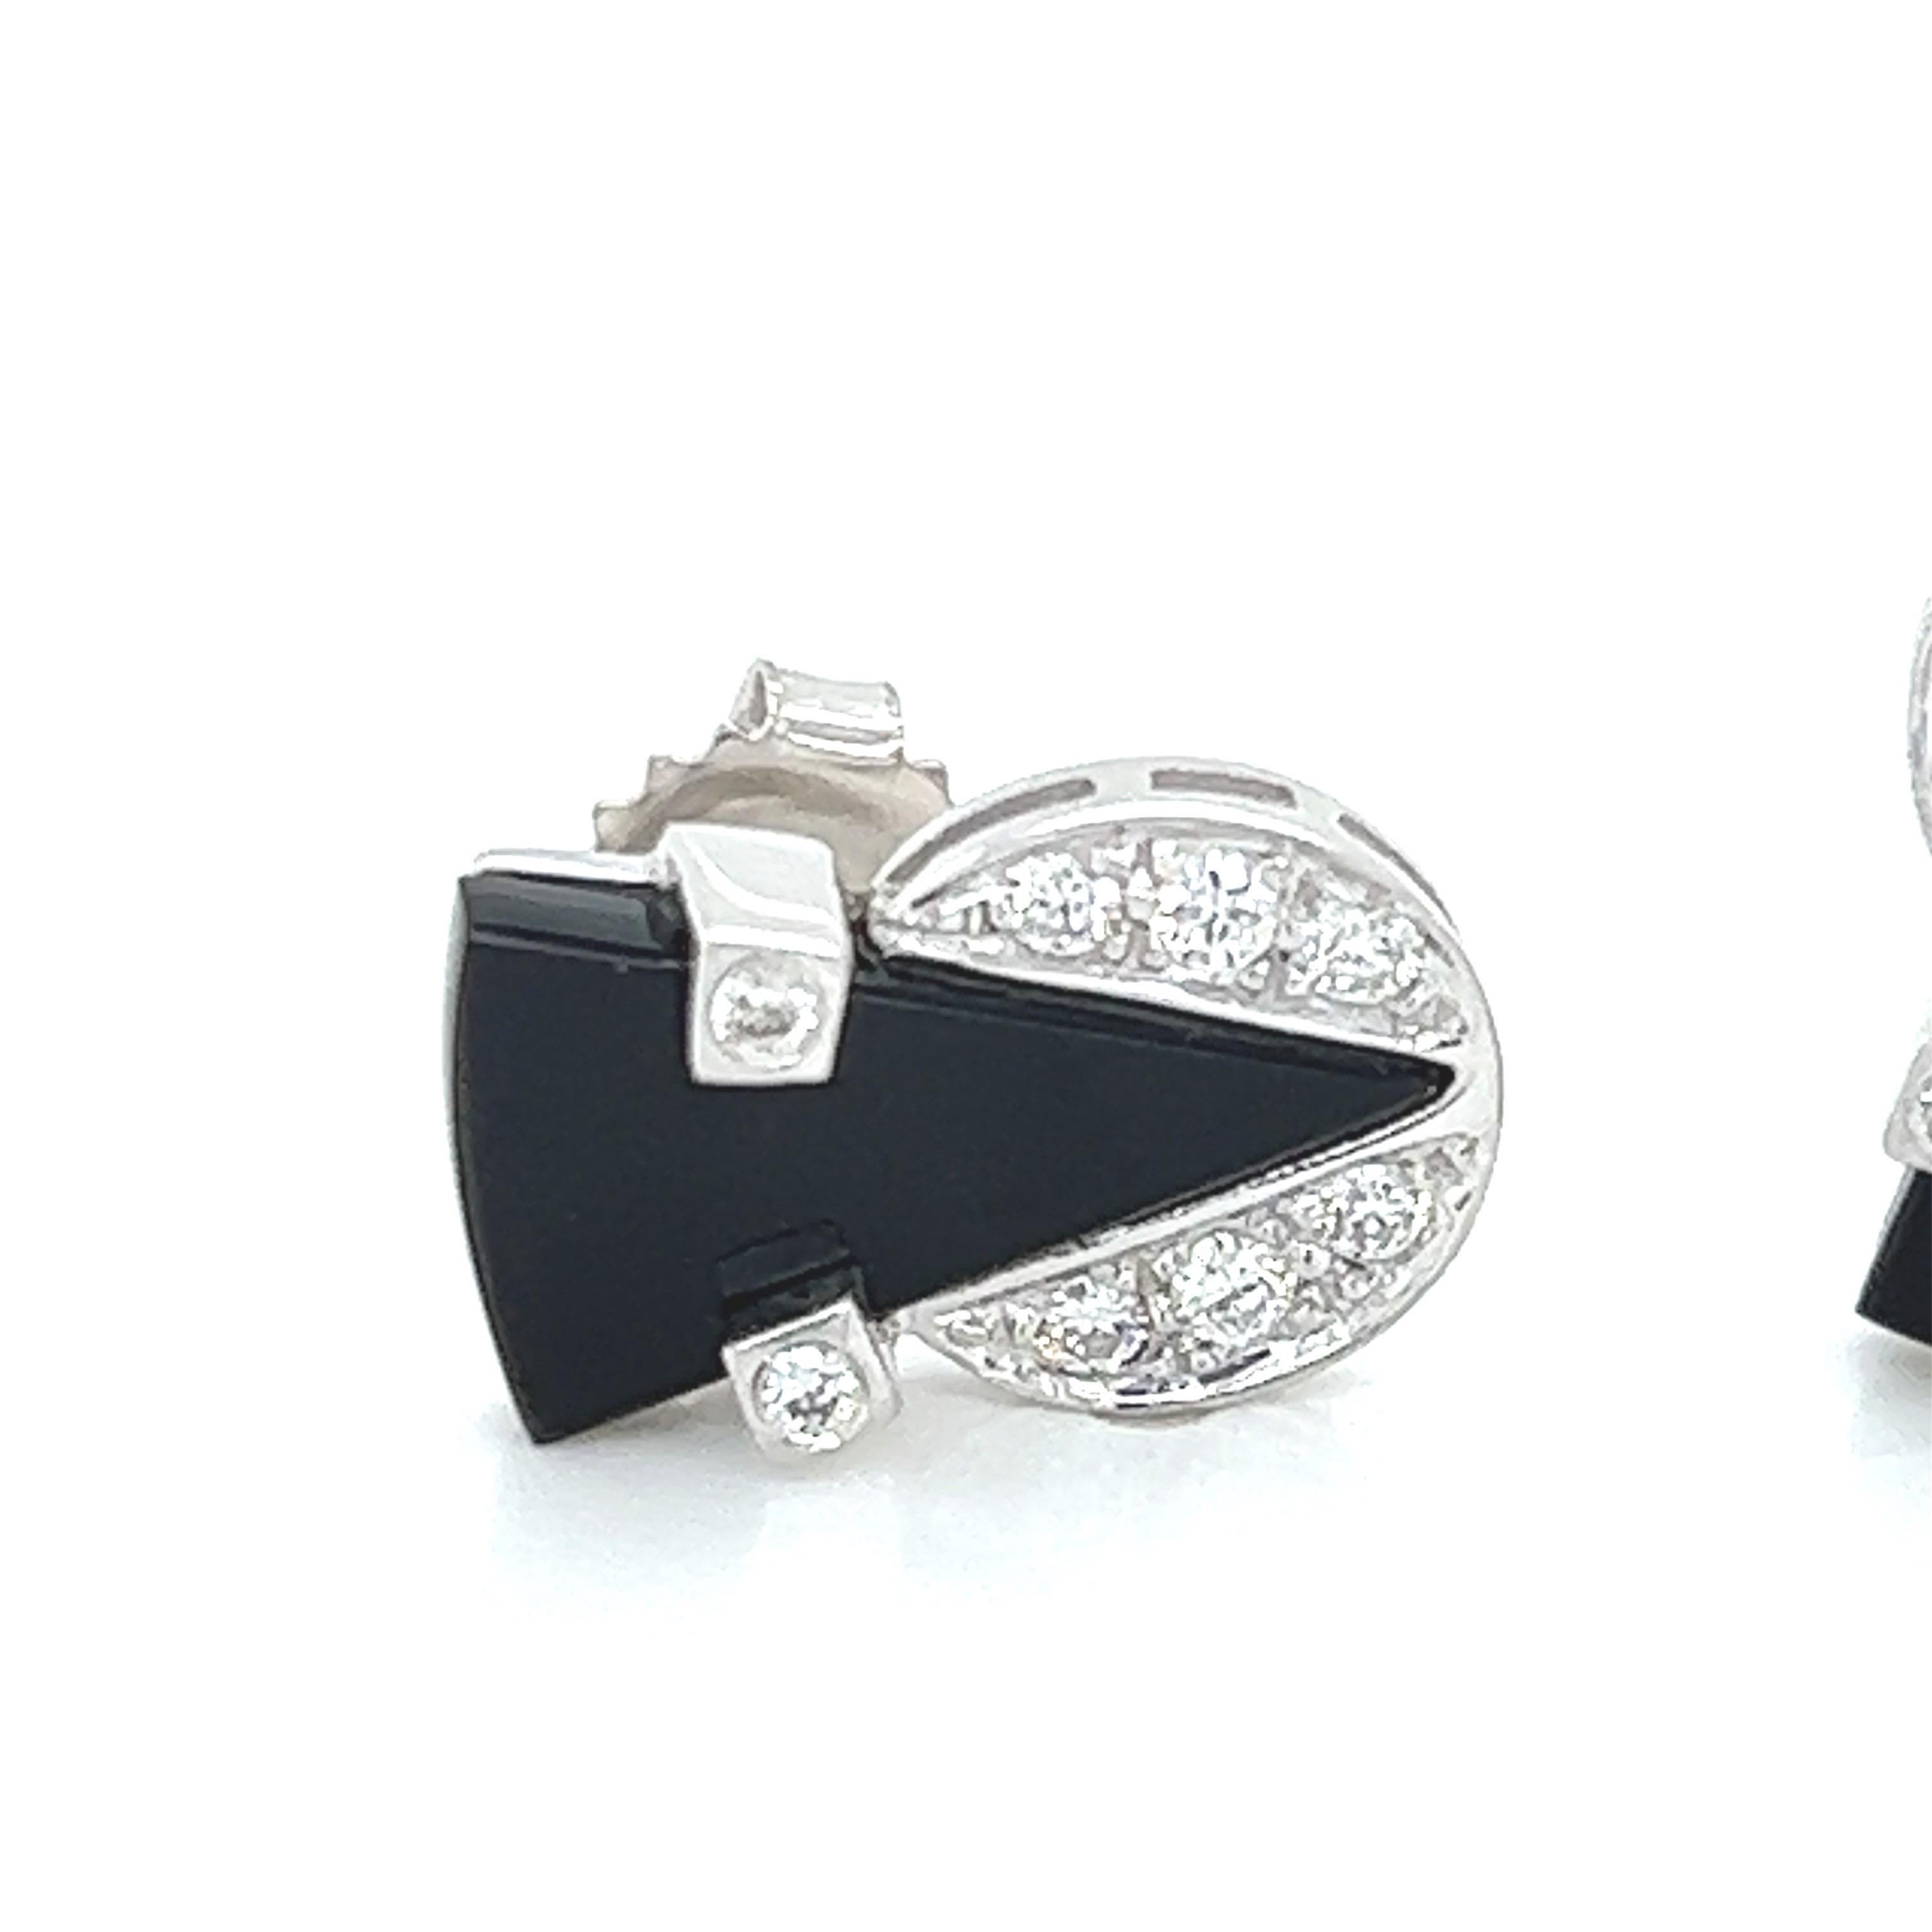 Art Deco Design Diamond and Black Onyx Stud Earrings in 18k White Gold.
Comes with 18k gold earring backs. 

It measures approx. 13.90mm x 9mm